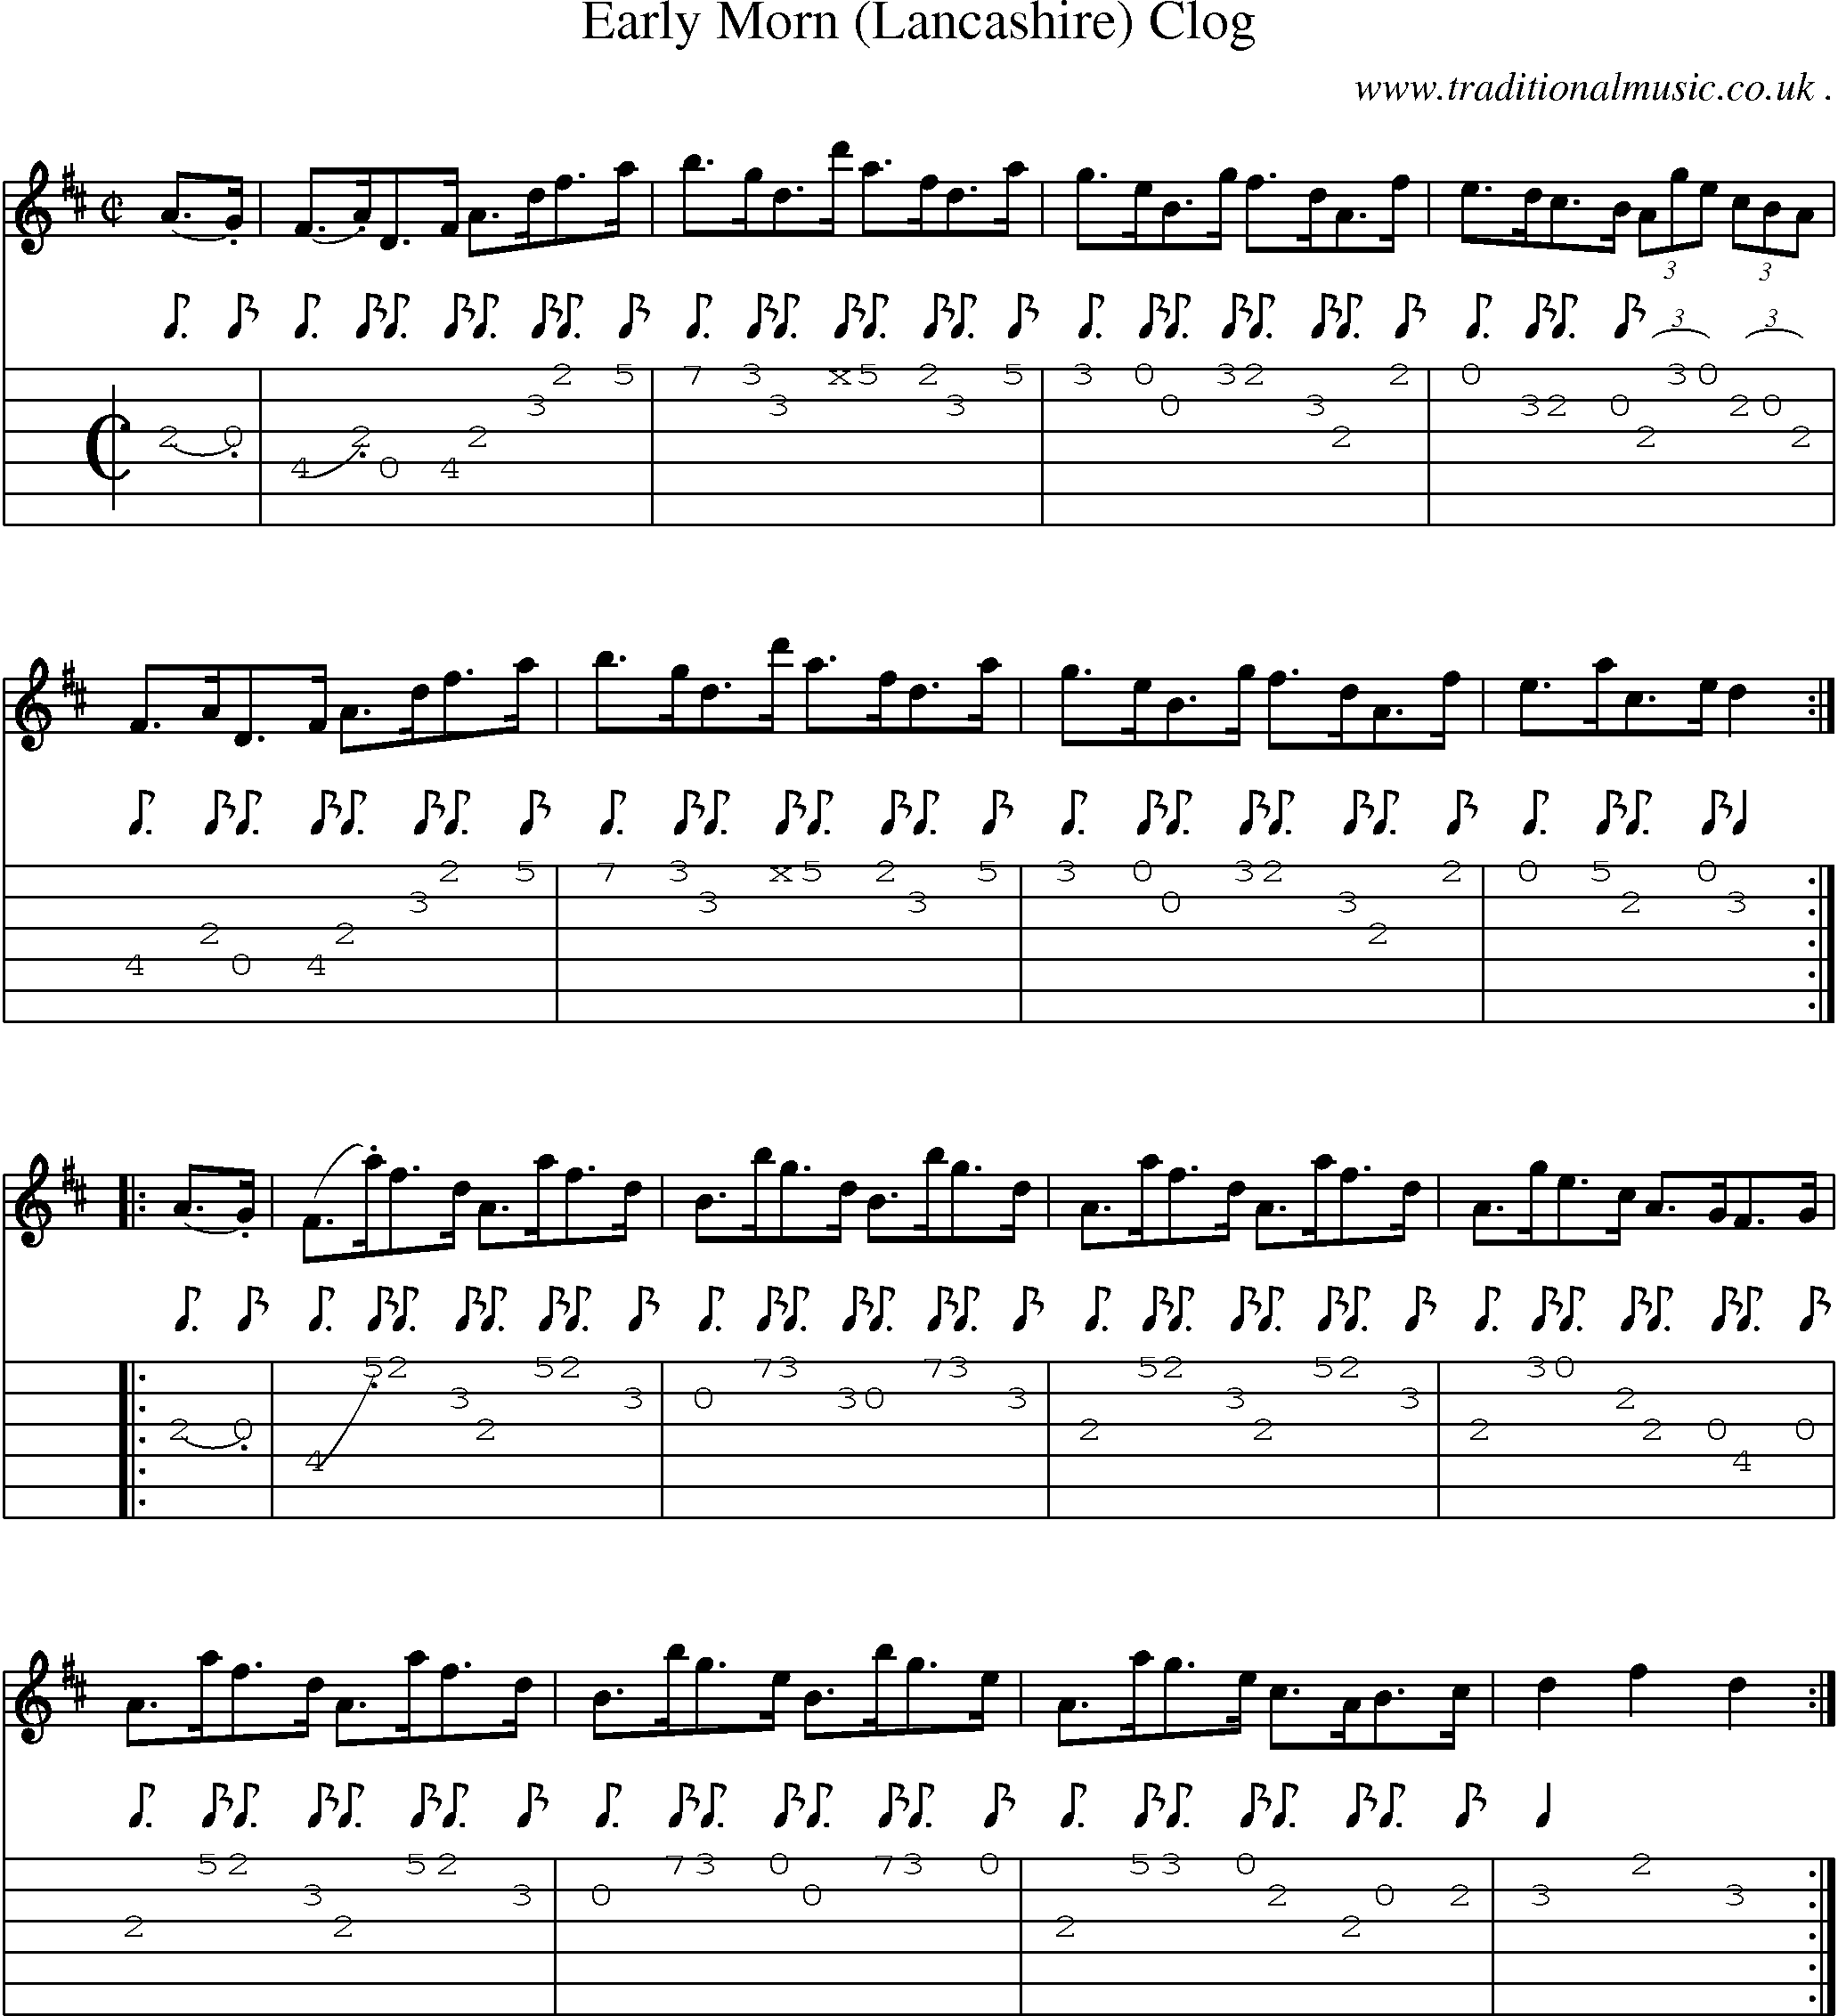 Sheet-Music and Guitar Tabs for Early Morn (lancashire) Clog